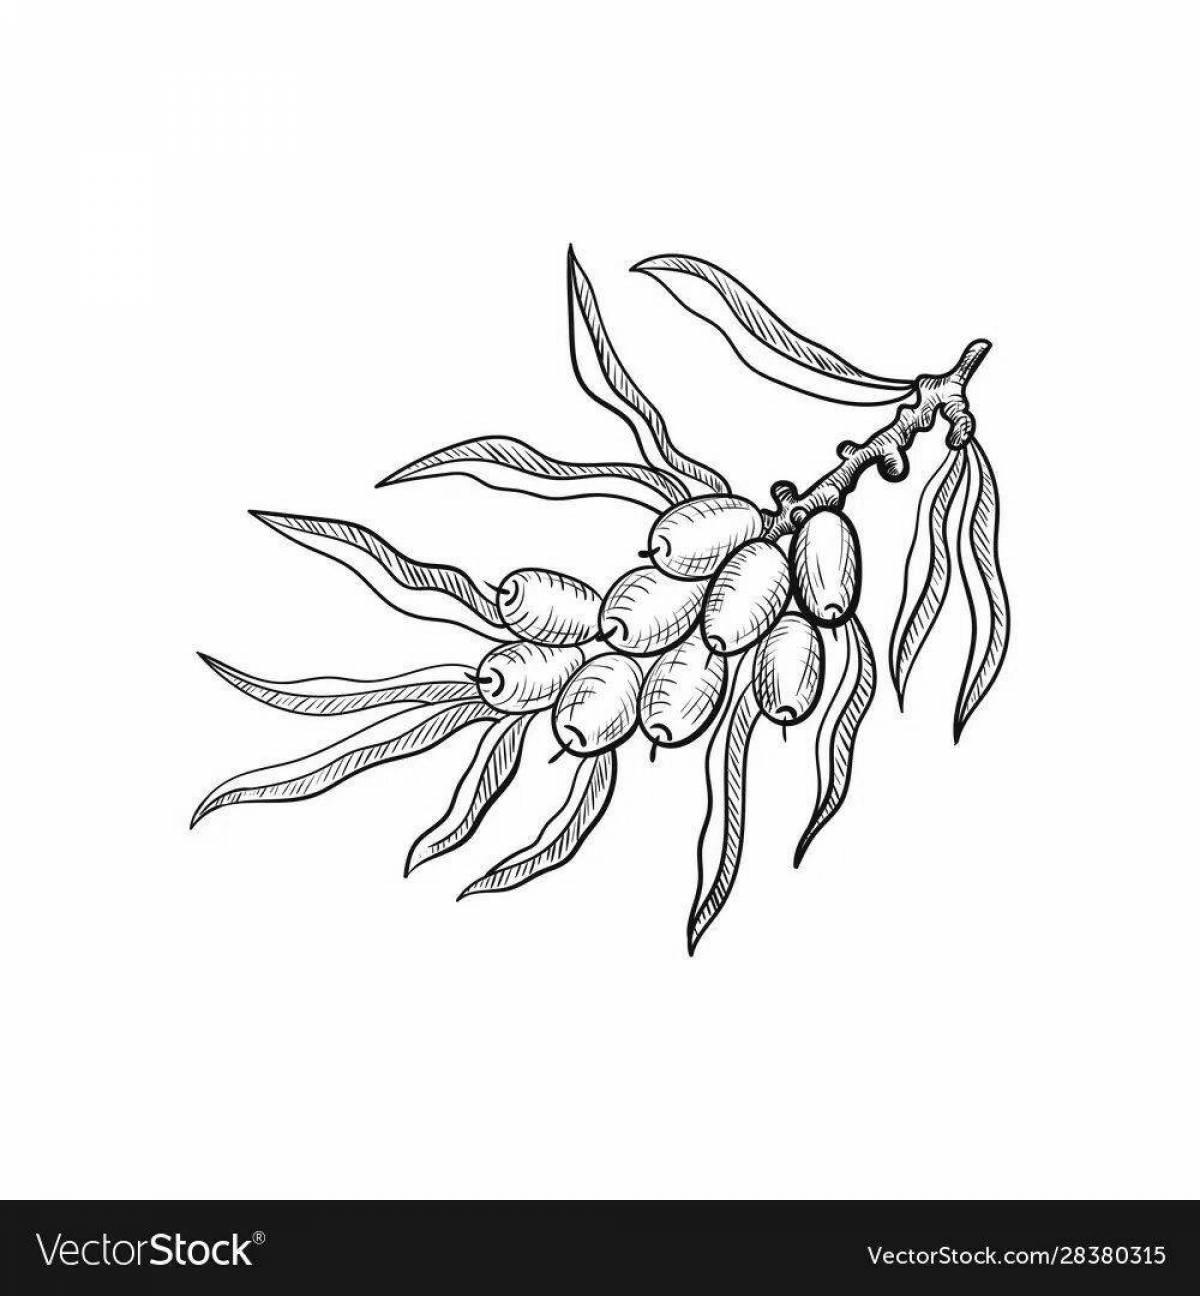 Amazing sea buckthorn coloring pages for kids